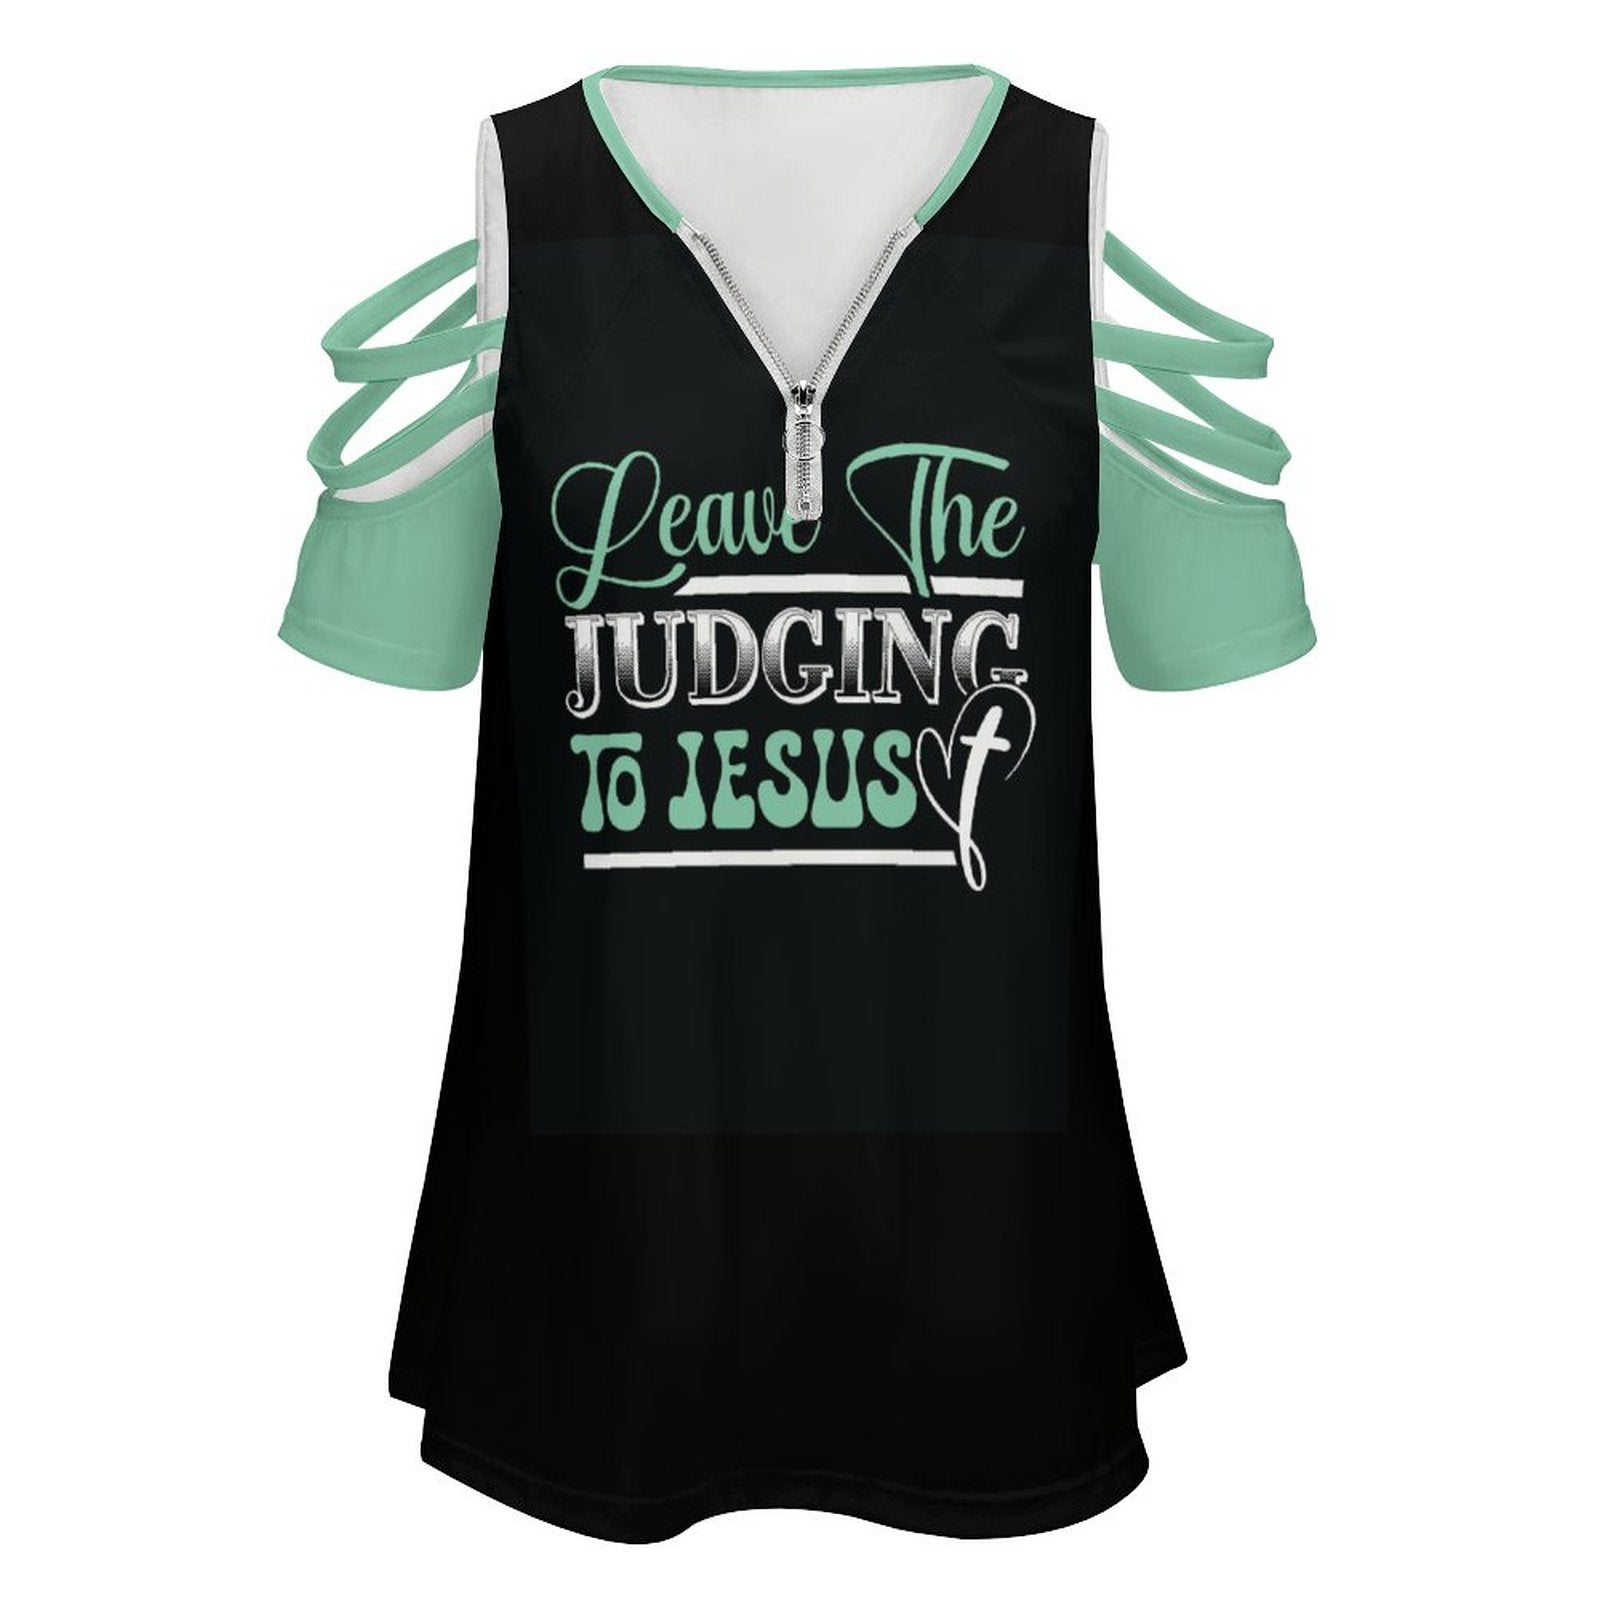 Leave The Judging To Jesus Women's Christian T-shirt SALE-Personal Design